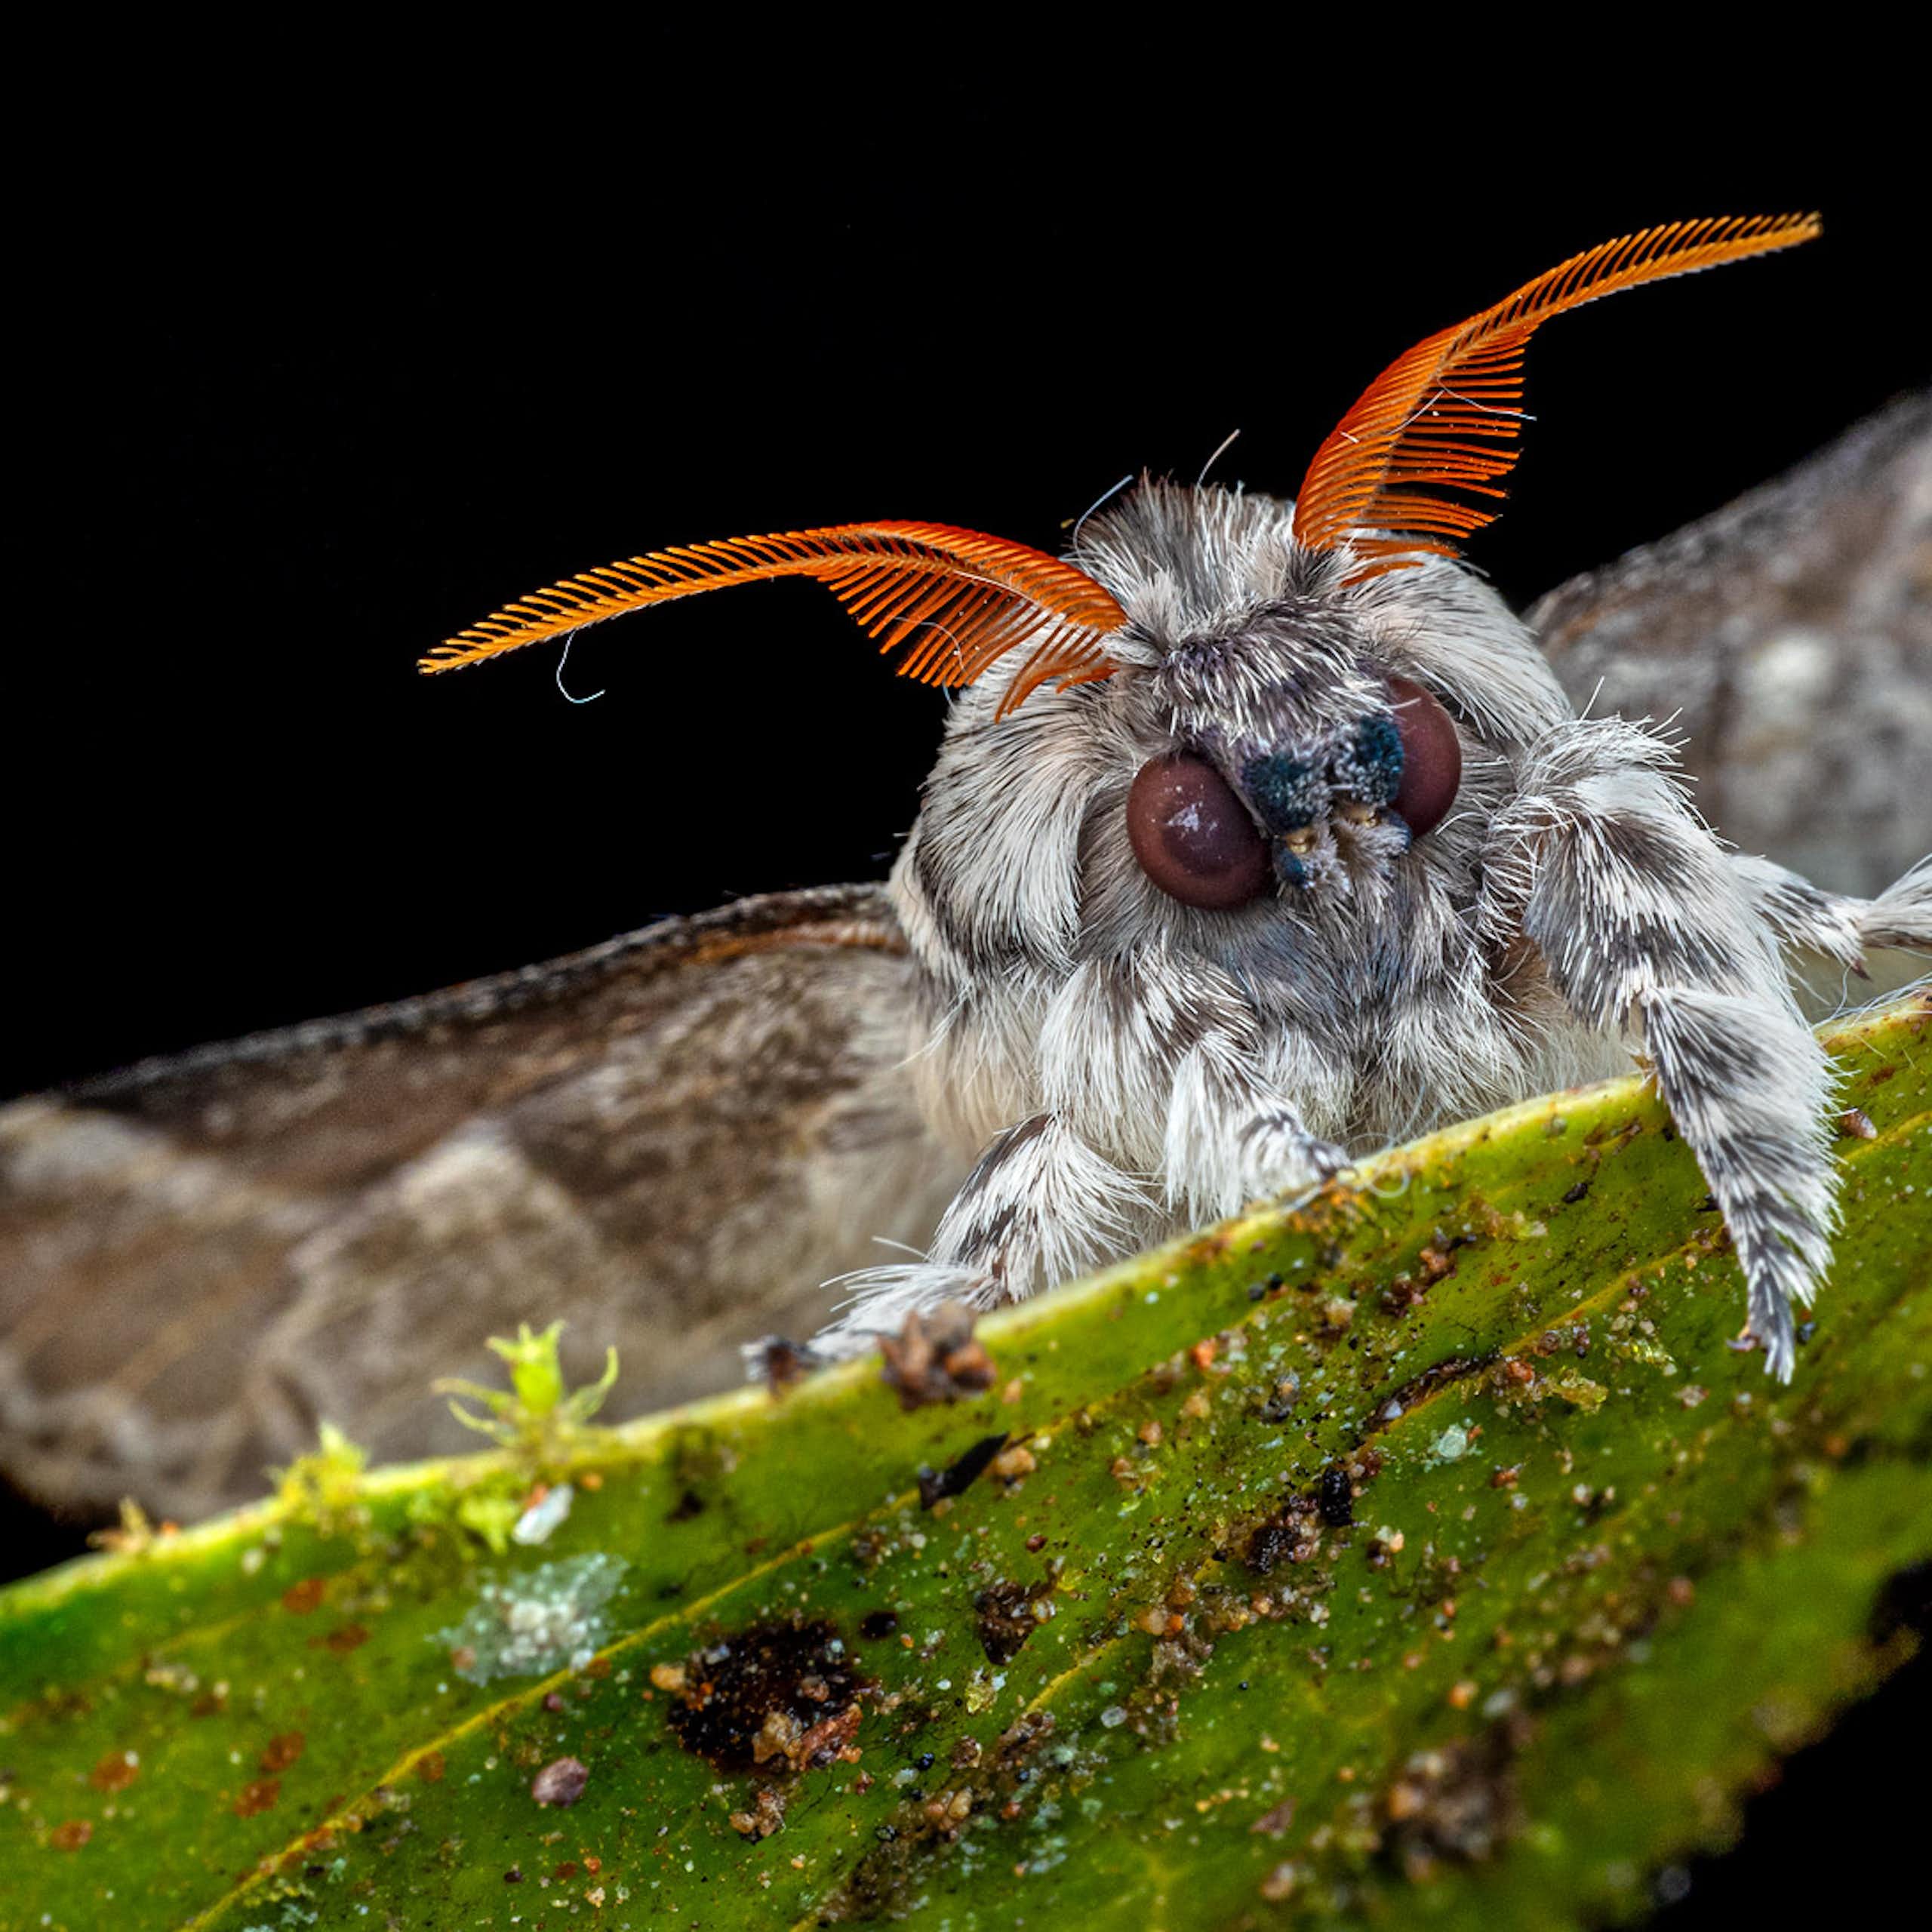 Macro photo of a furry Lappet moth (Tolype sp.) with bright orange antennae climbing over the top of a leaf